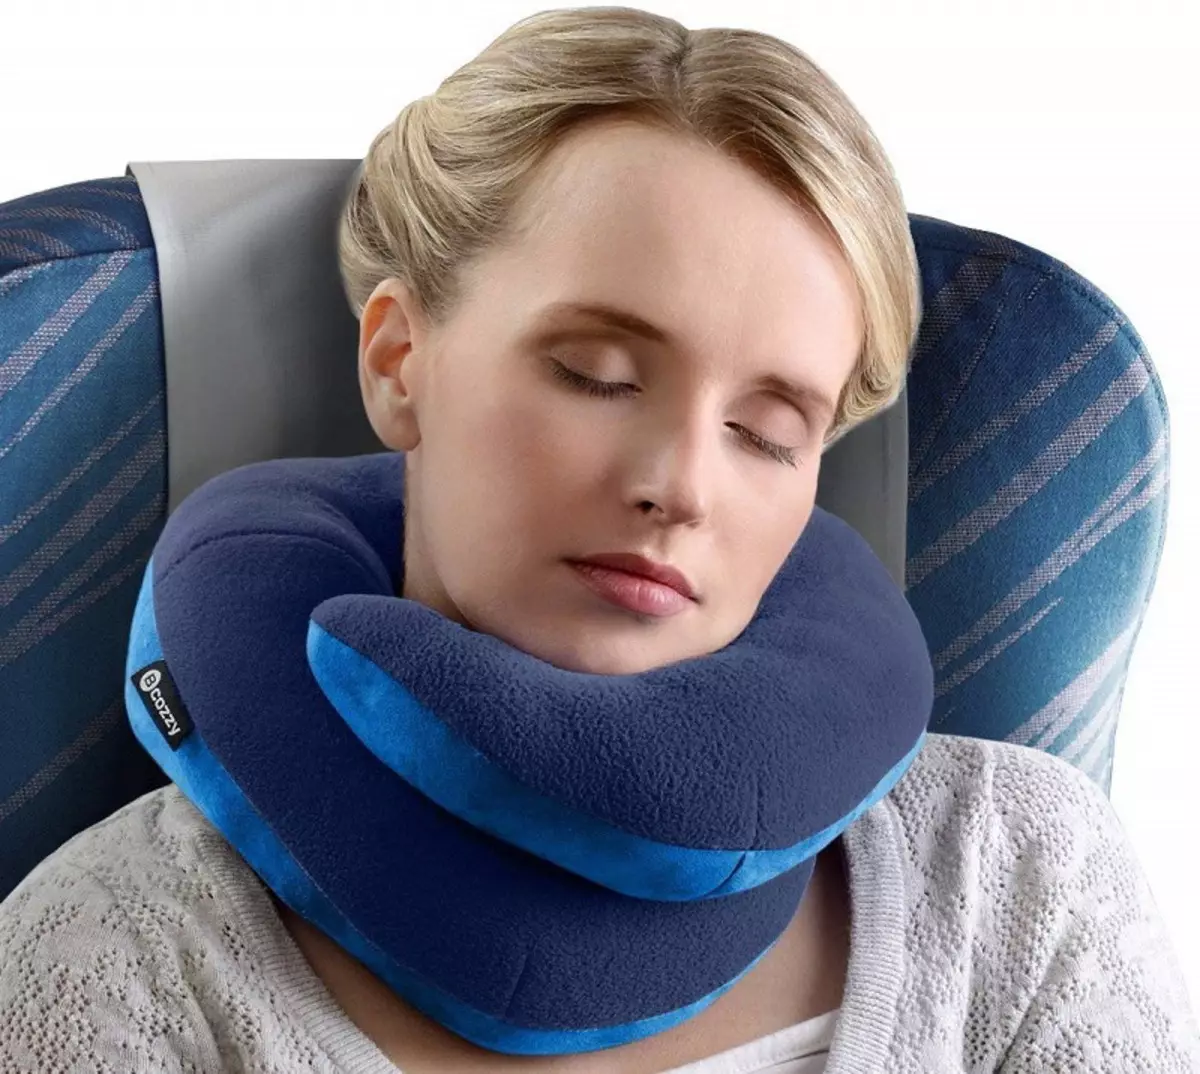 Travel Pillows: Road Pillows For Sleeping Plane, Neck Pillows, Head And Foot, Baby and Adults, Transformers 20755_49